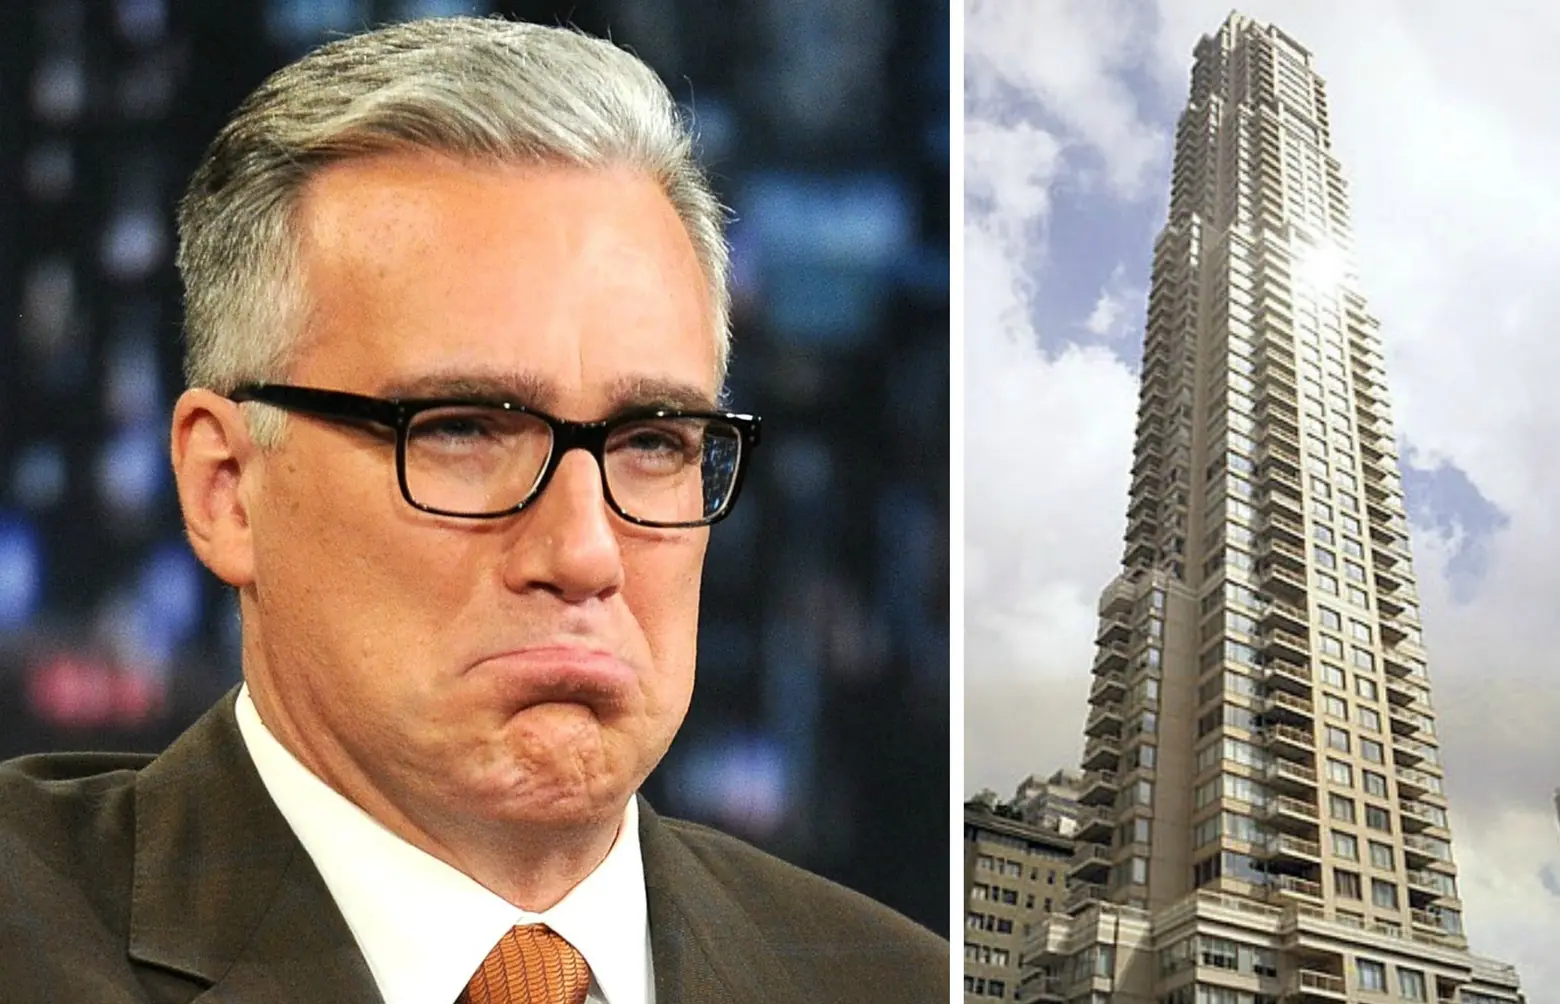 Keith Olbermann Lists Trump Palace Condo for $4M in Opposition to Presidential Candidate